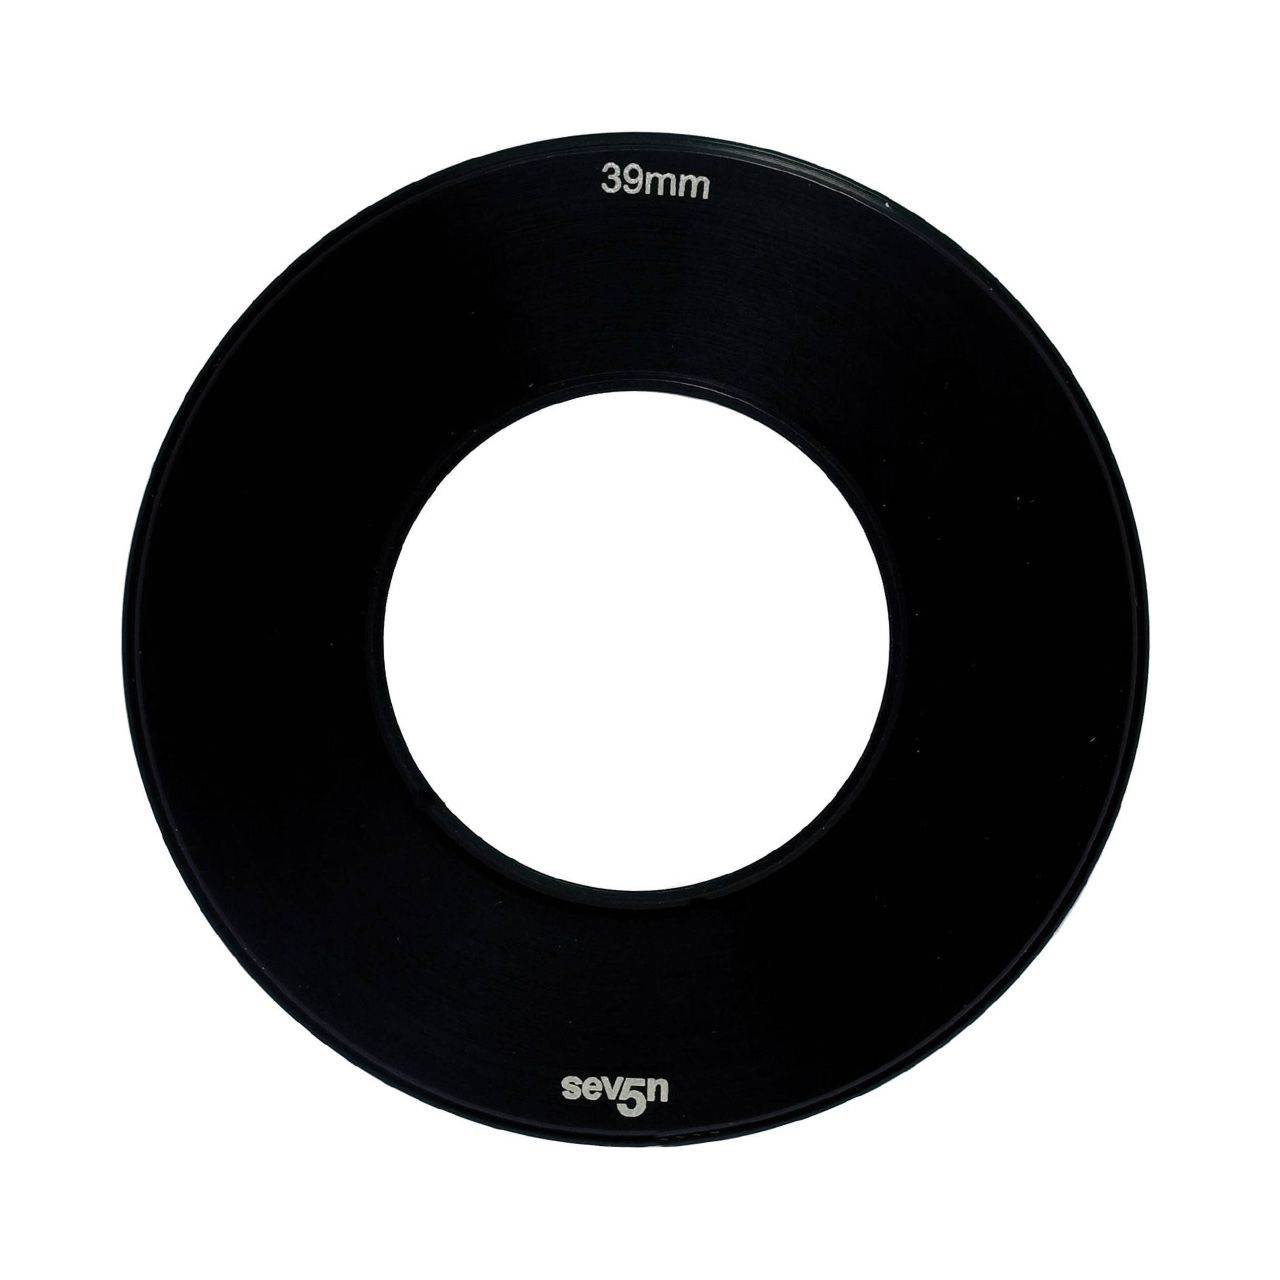 LEE Filters Seven5 Adapter Ring 39Mm